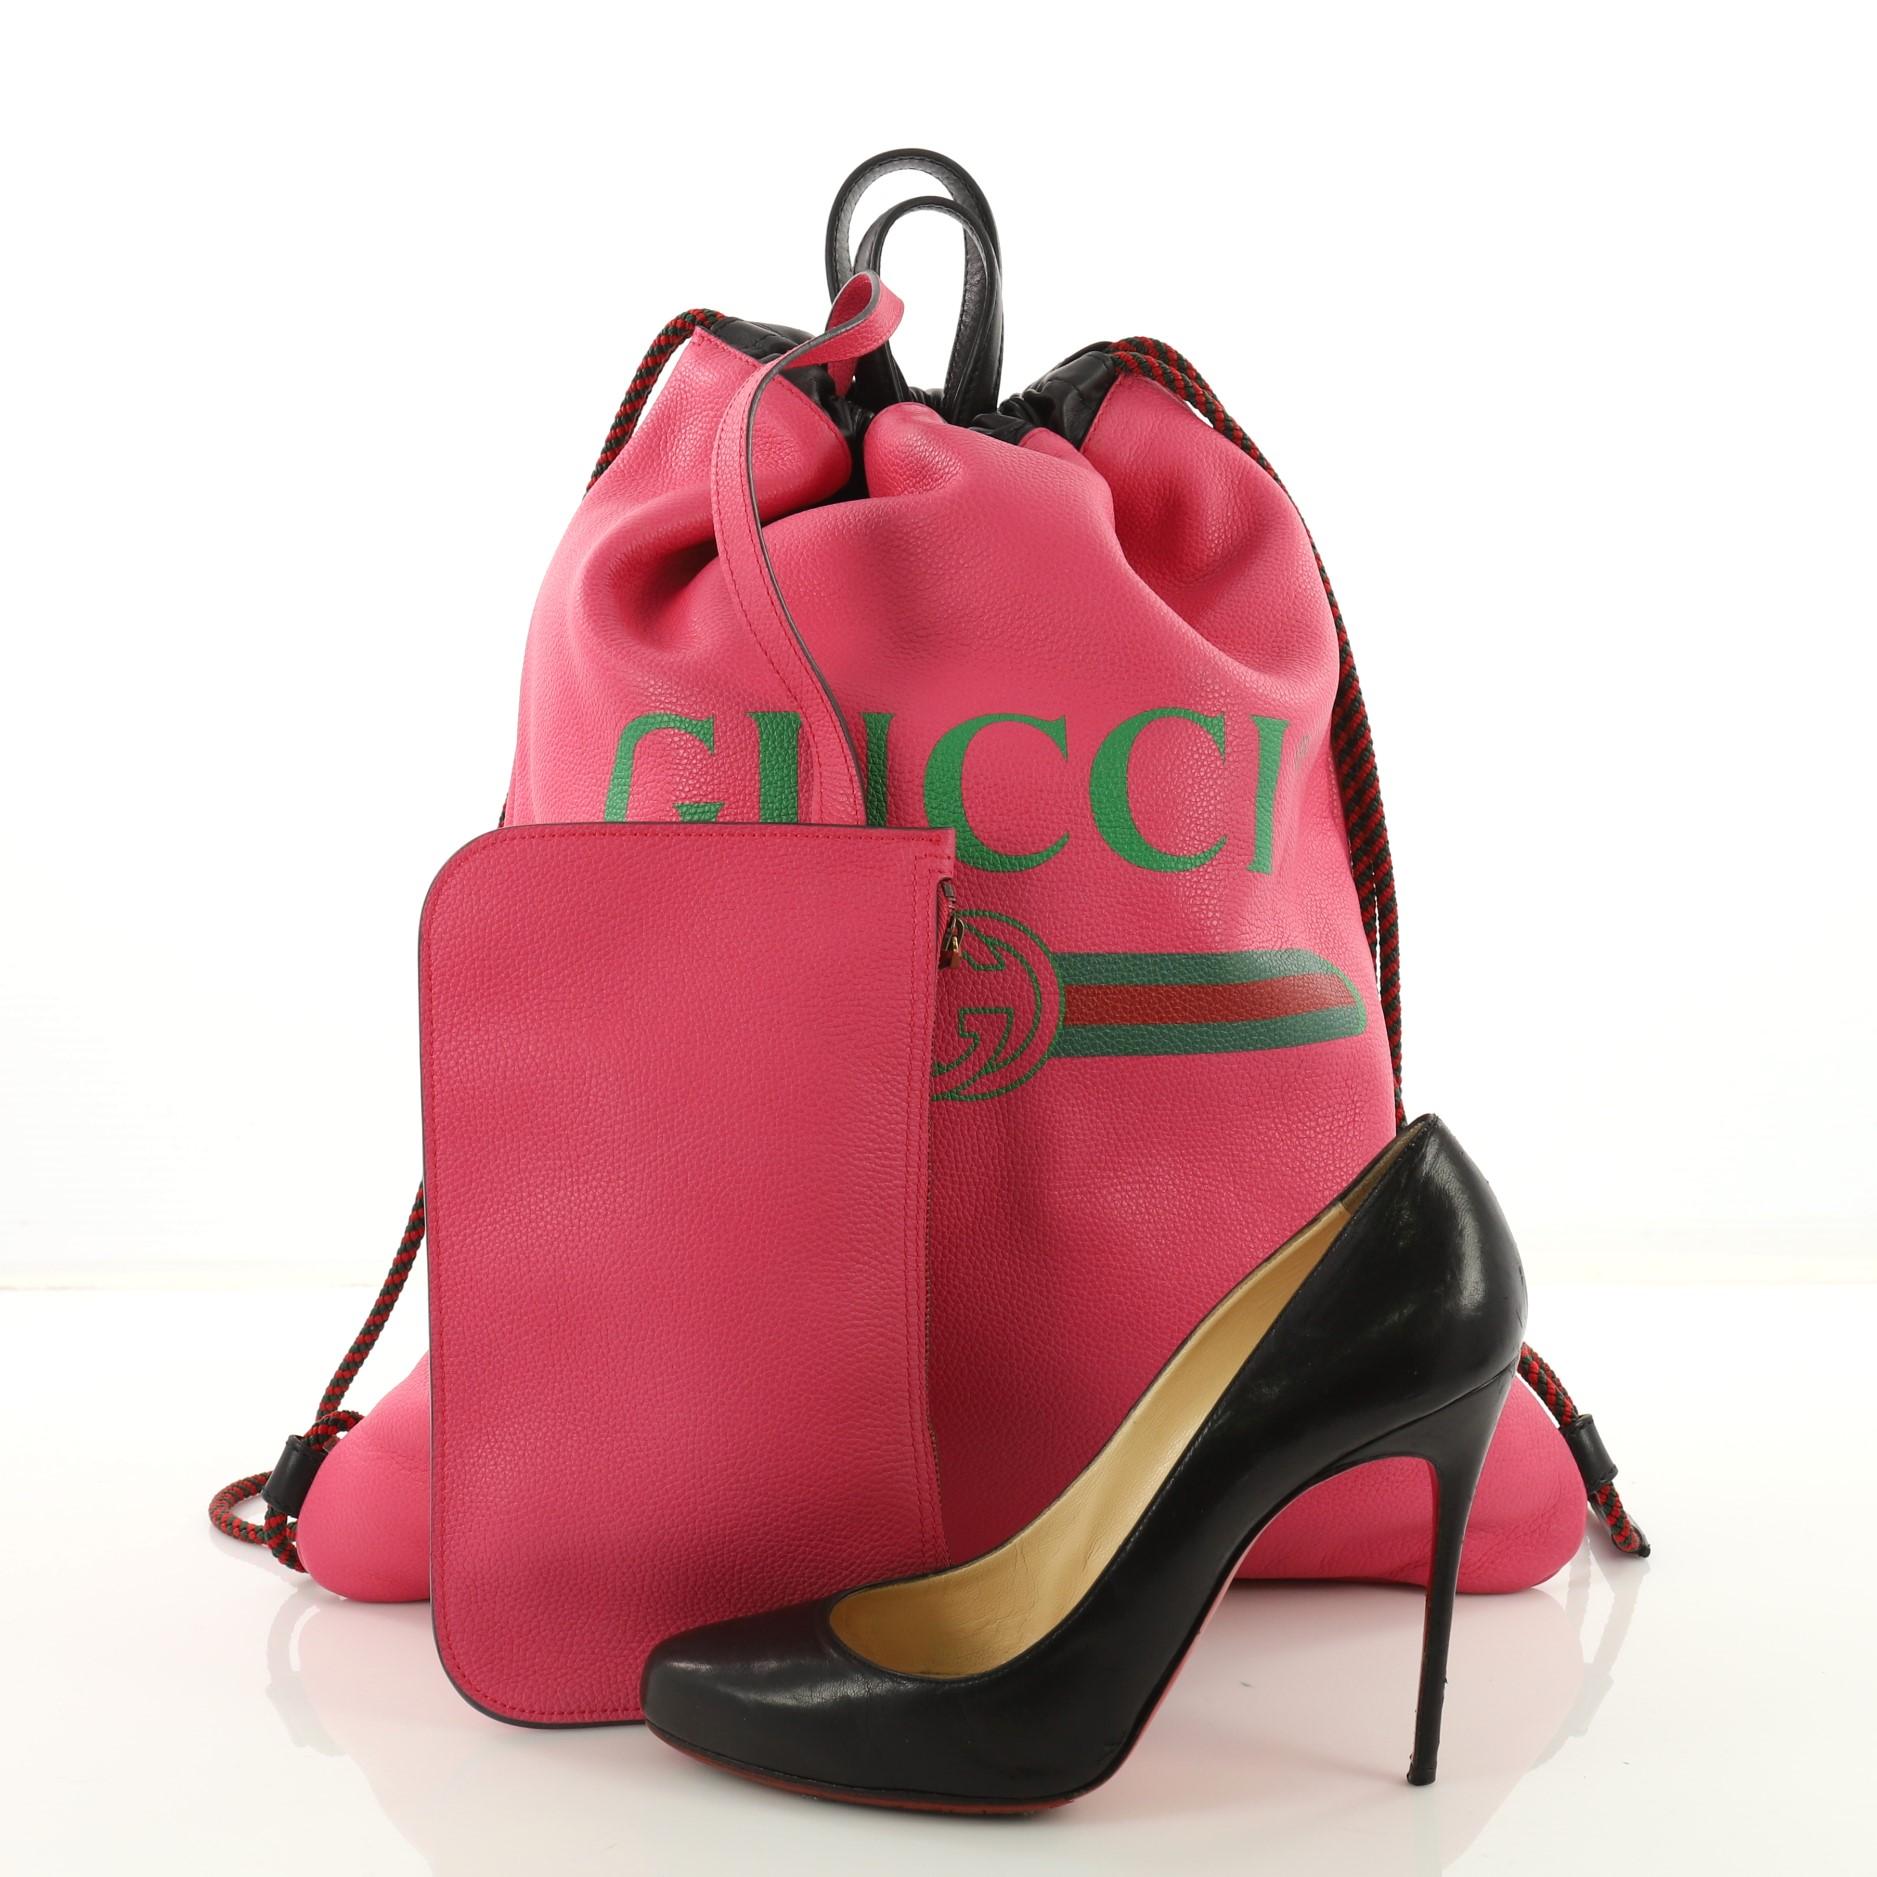 This Gucci Logo Drawstring Backpack Printed Leather Large, crafted in pink printed leather, features dual leather handles, ope straps that double function as a drawstring and aged gold-tone hardware. Its drawstring closure opens to a pink leather